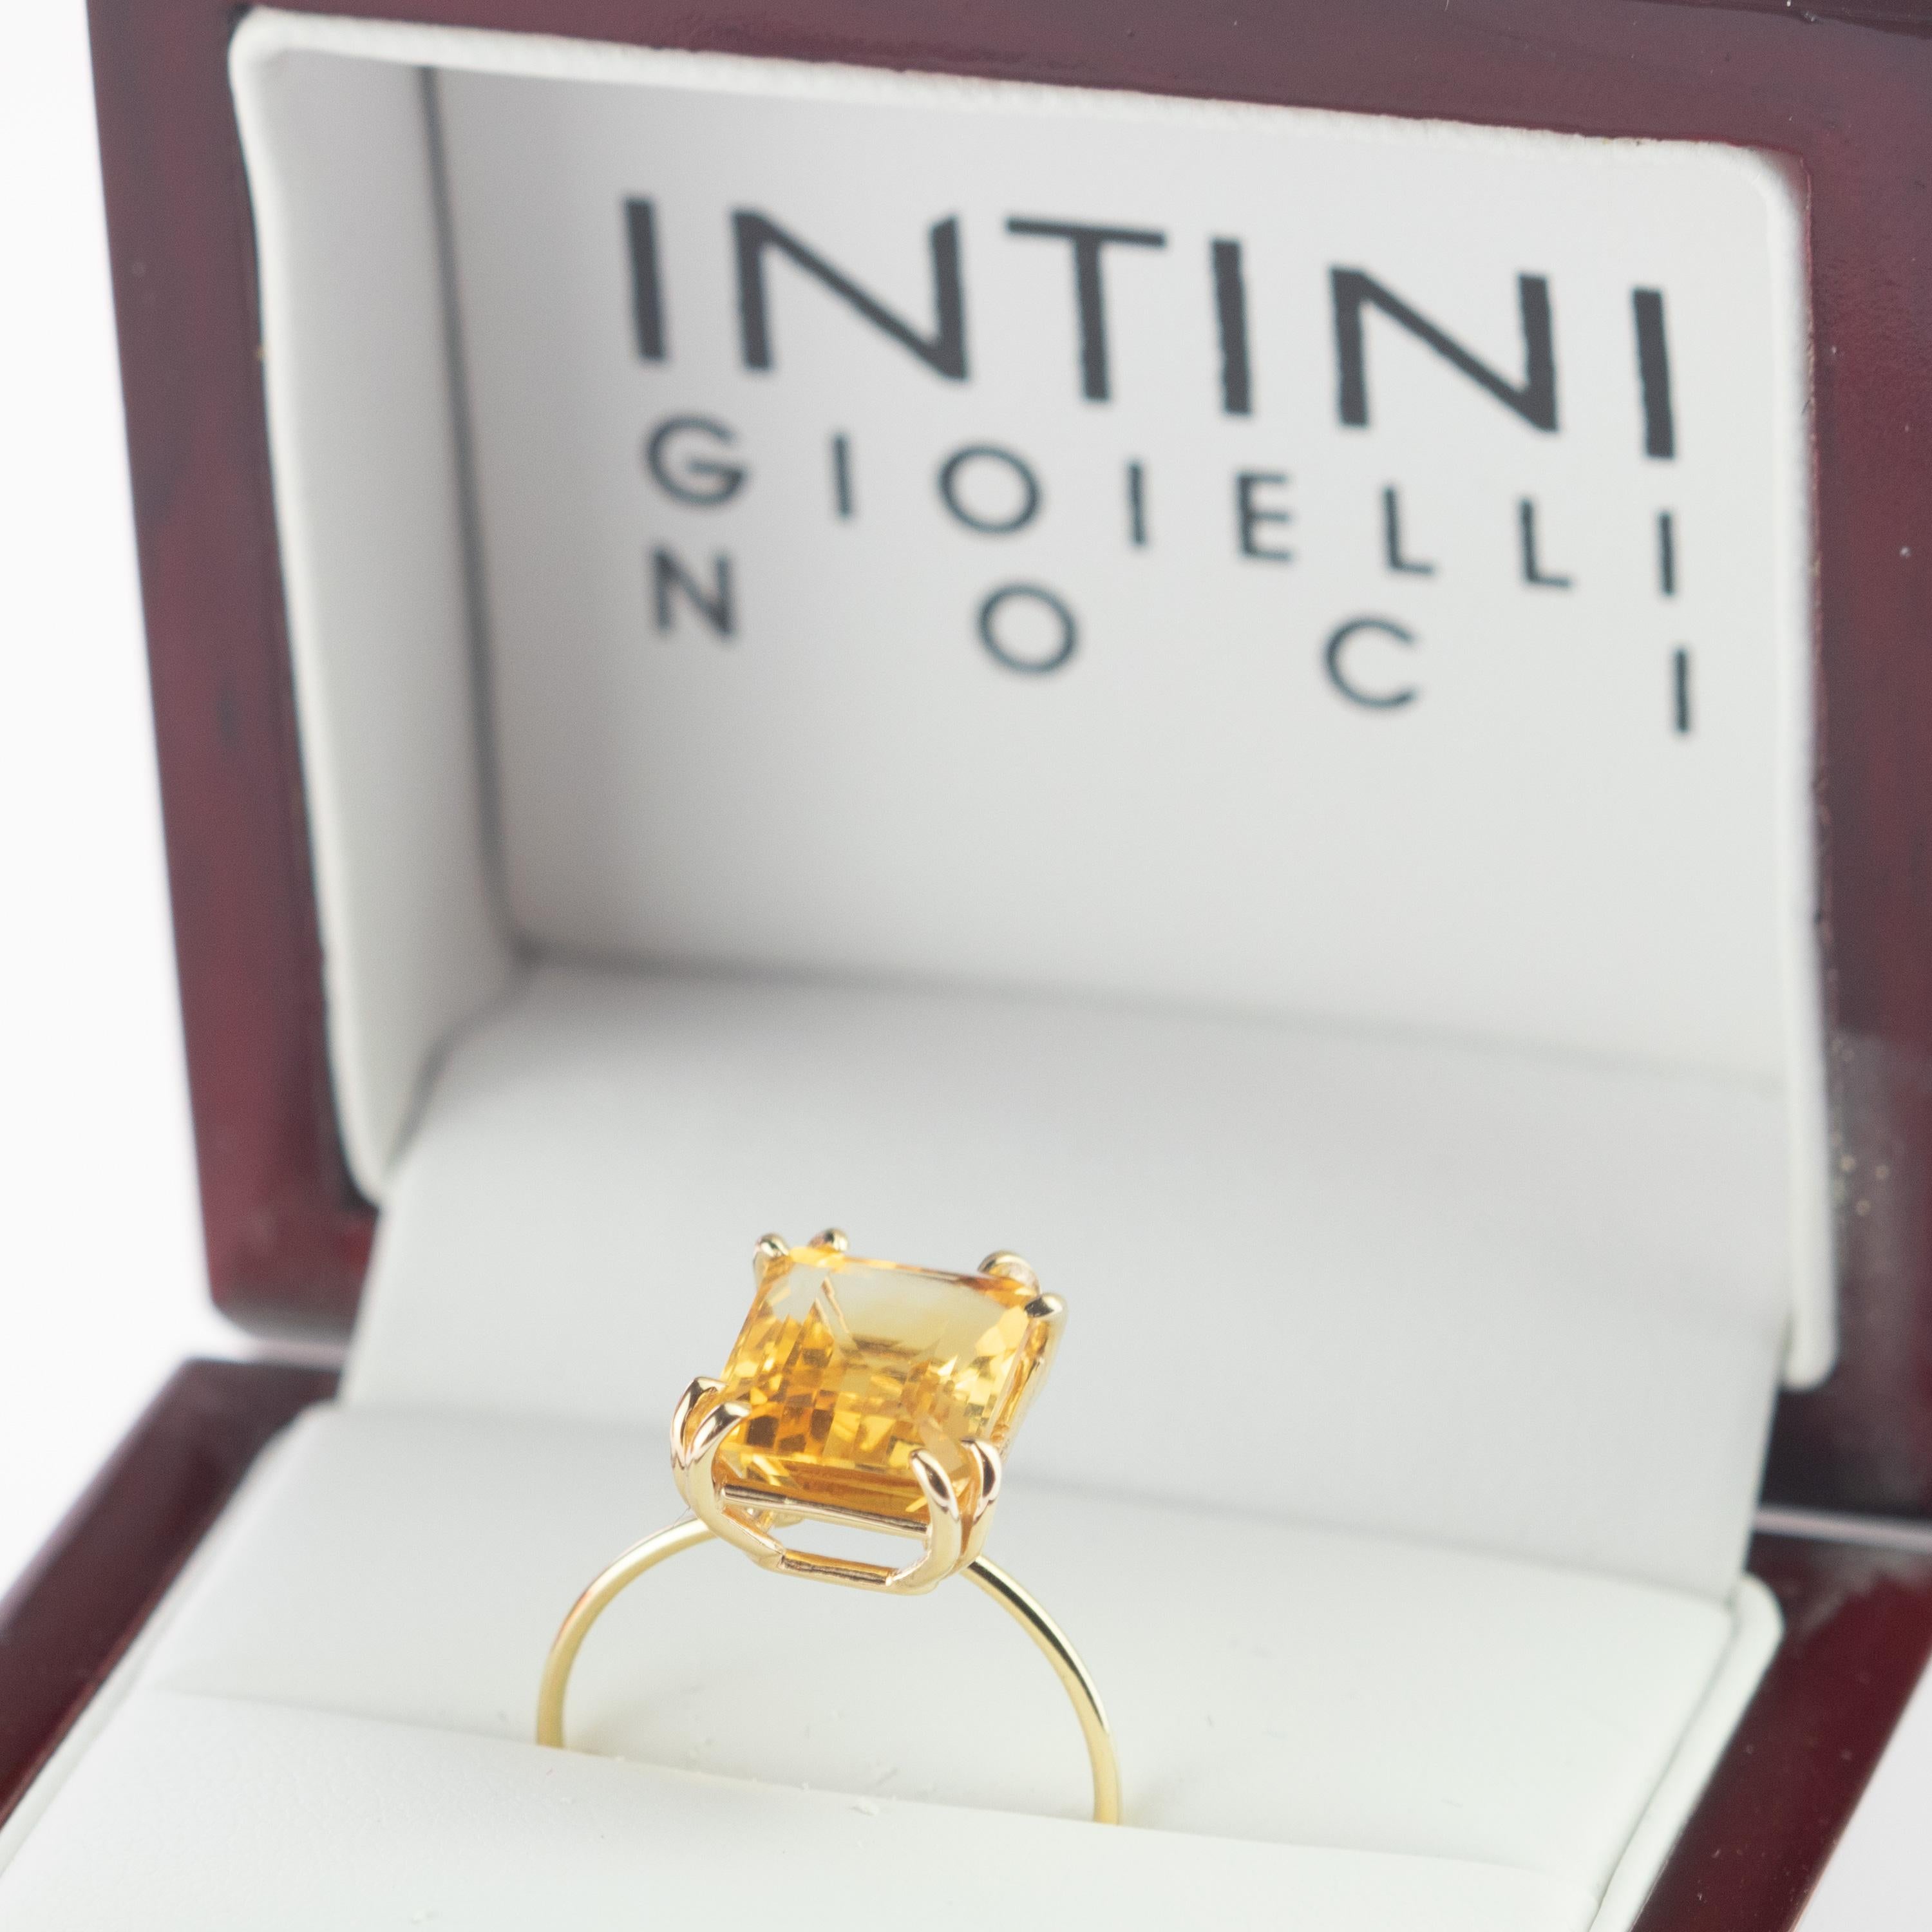 This extraordinary citrine quartz (6 carats) ring. All artfully set and crafted in 9k yellow gold to create this stunning piece of jewelry. This artwork is for a fresh, young and modern woman.

Inspired by the sun, the quartz resembles the fire that